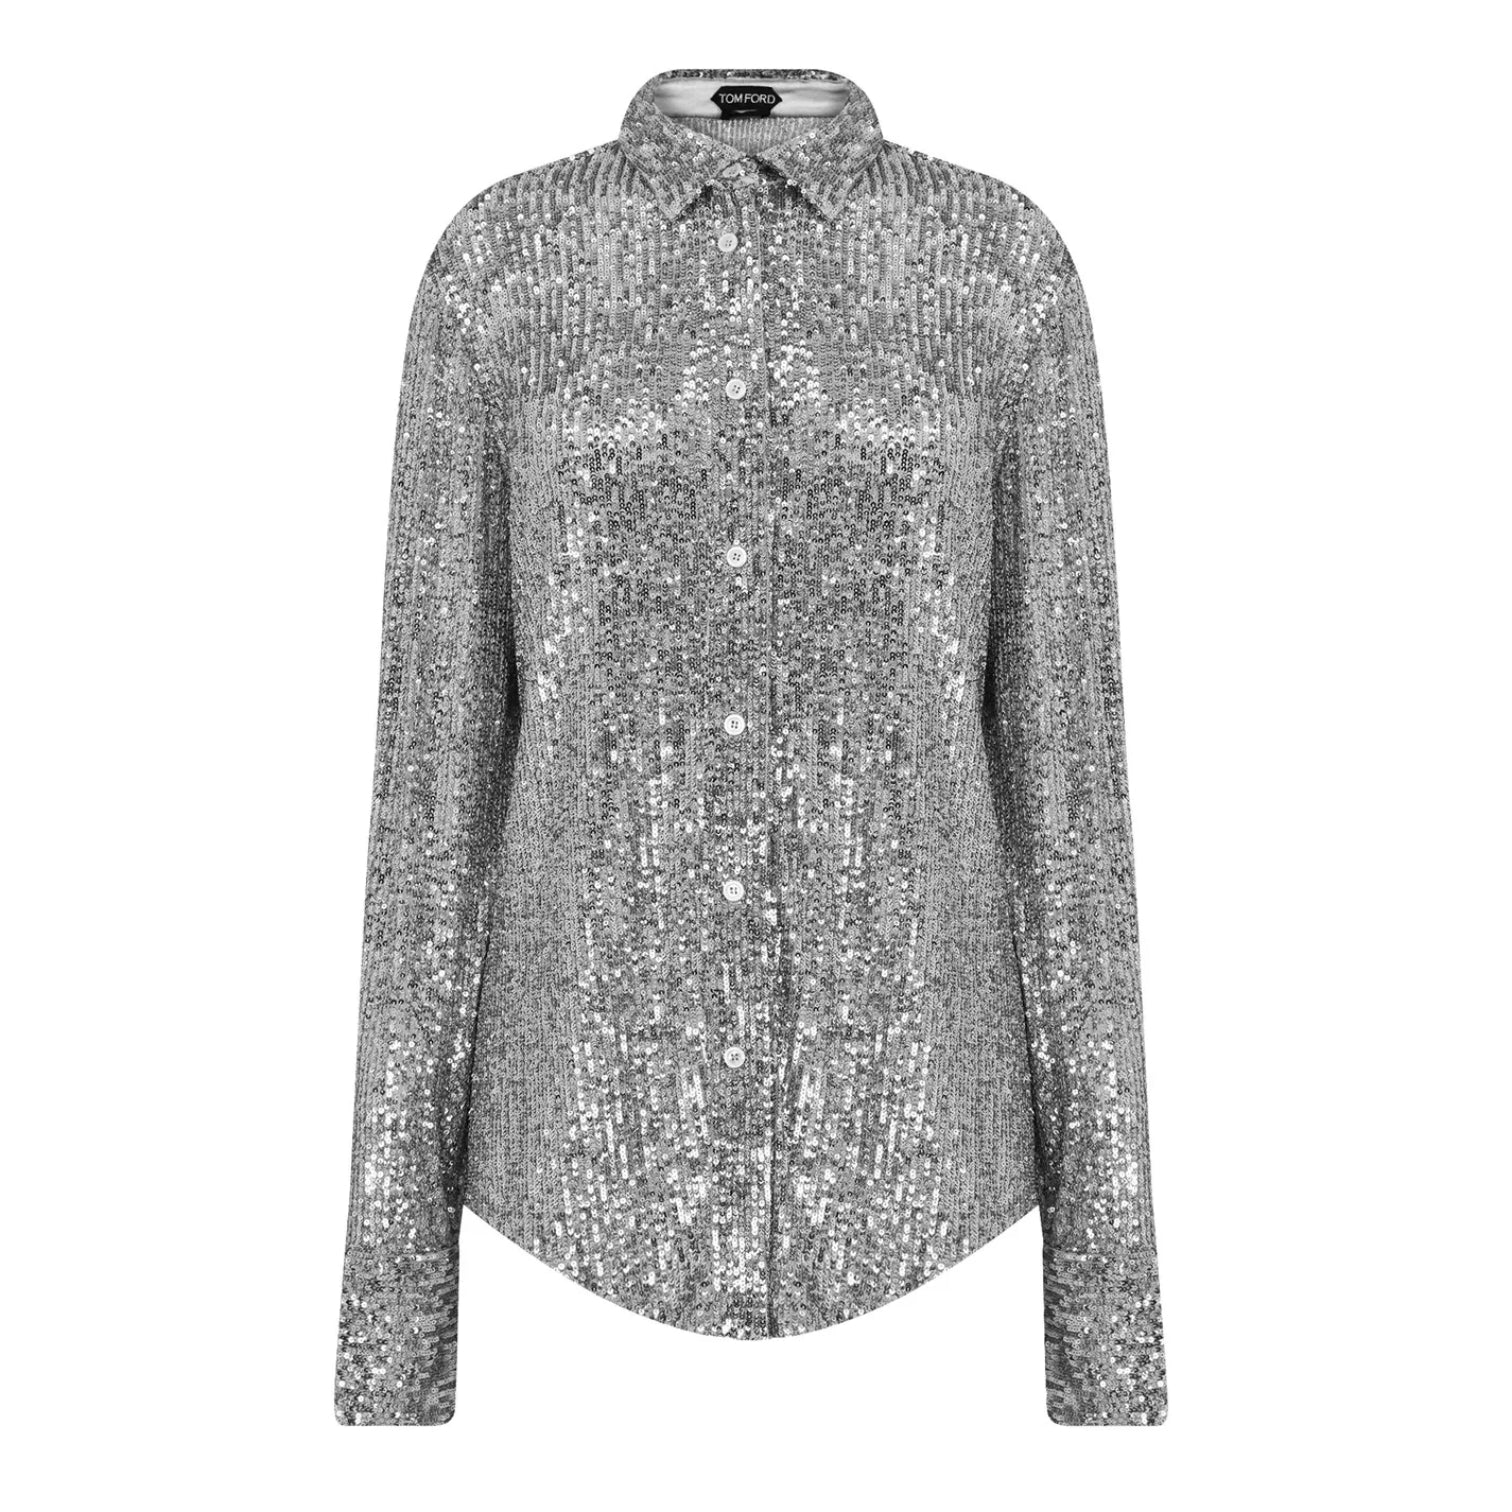 LUXURY HUB TOM FORD ALL OVER SEQUIN SHIRT